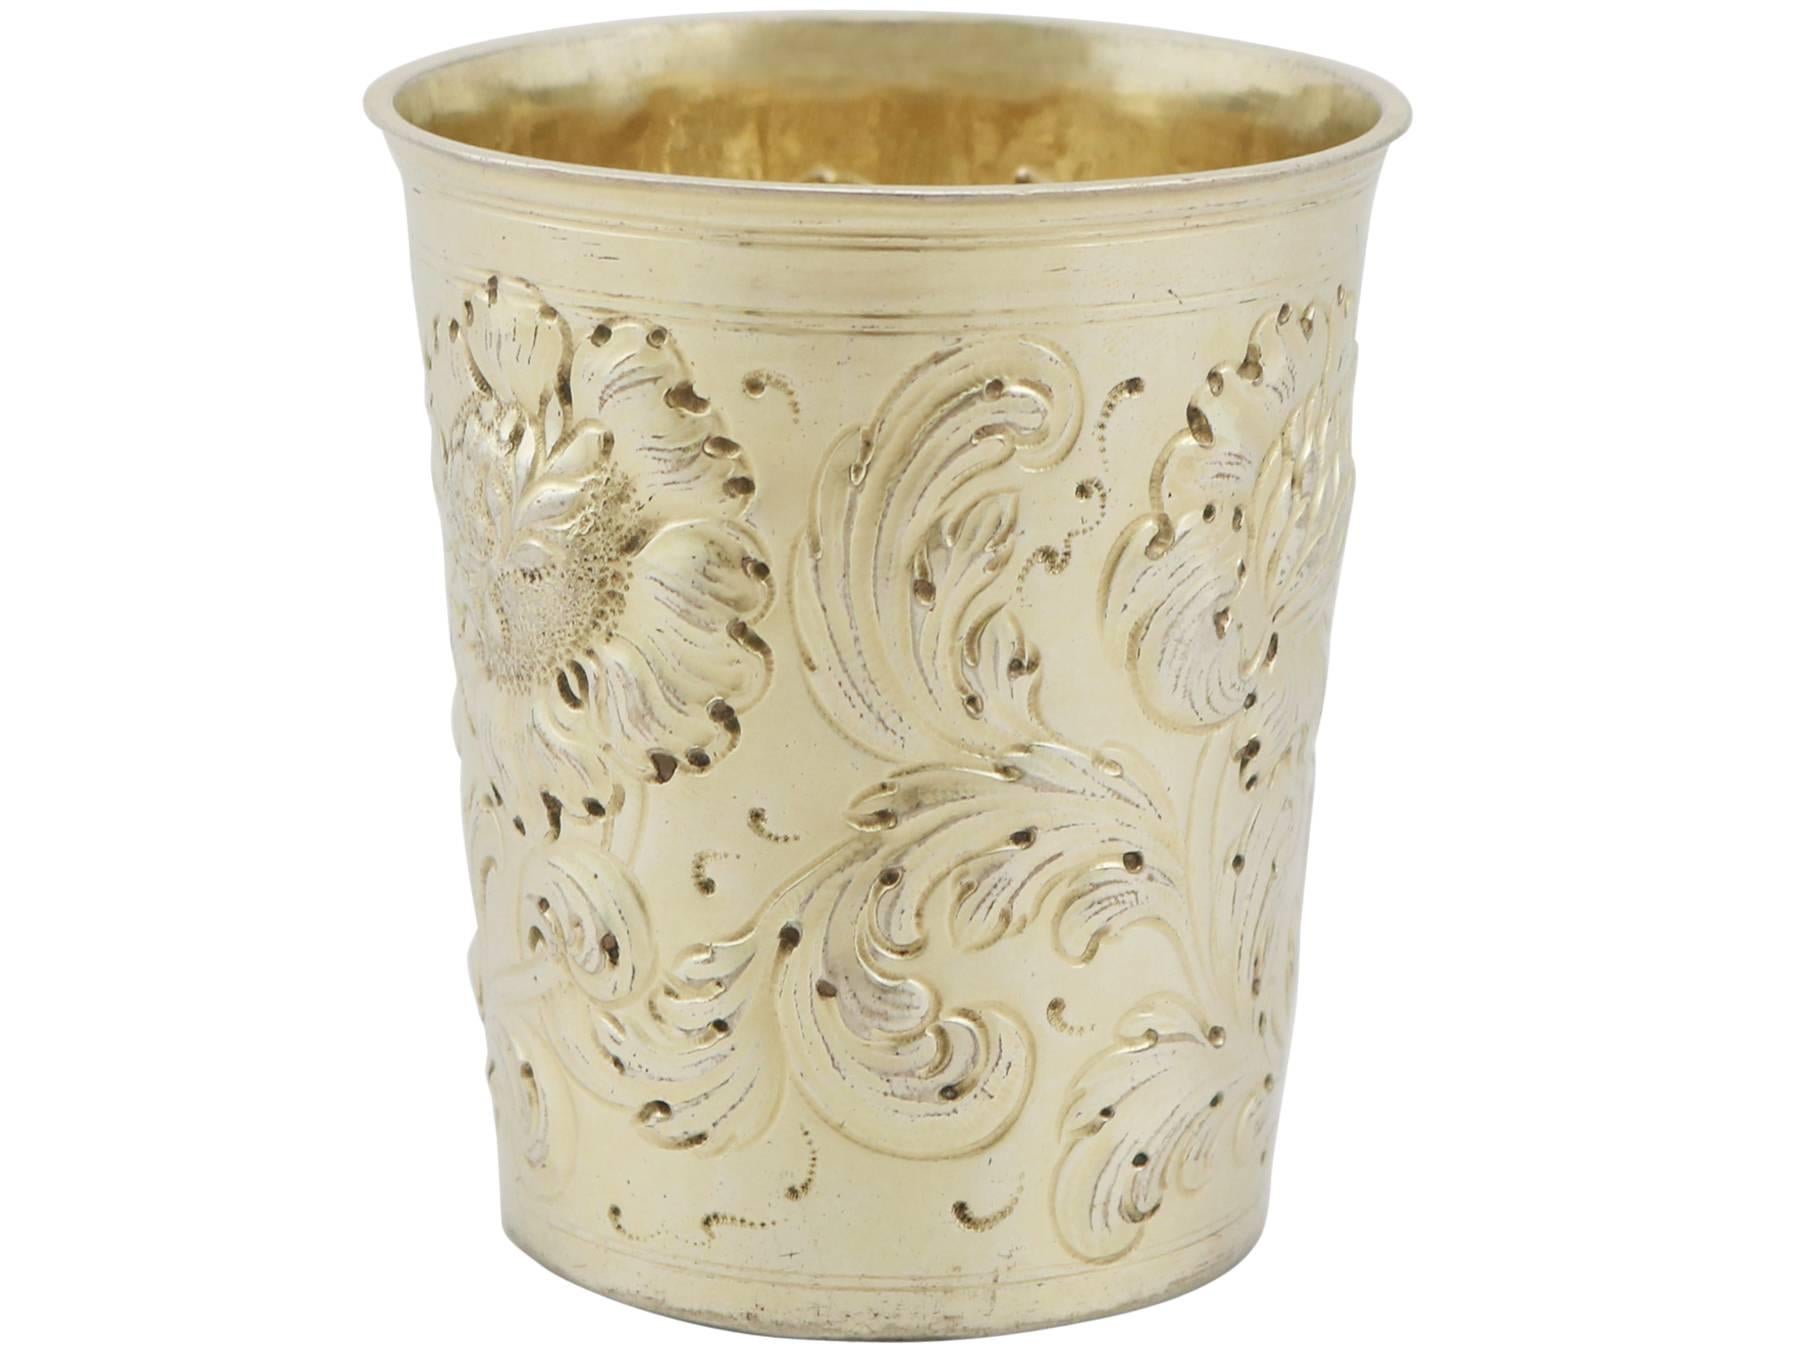 Antique 18th Century German Silver Gilt Beaker In Excellent Condition For Sale In Jesmond, Newcastle Upon Tyne